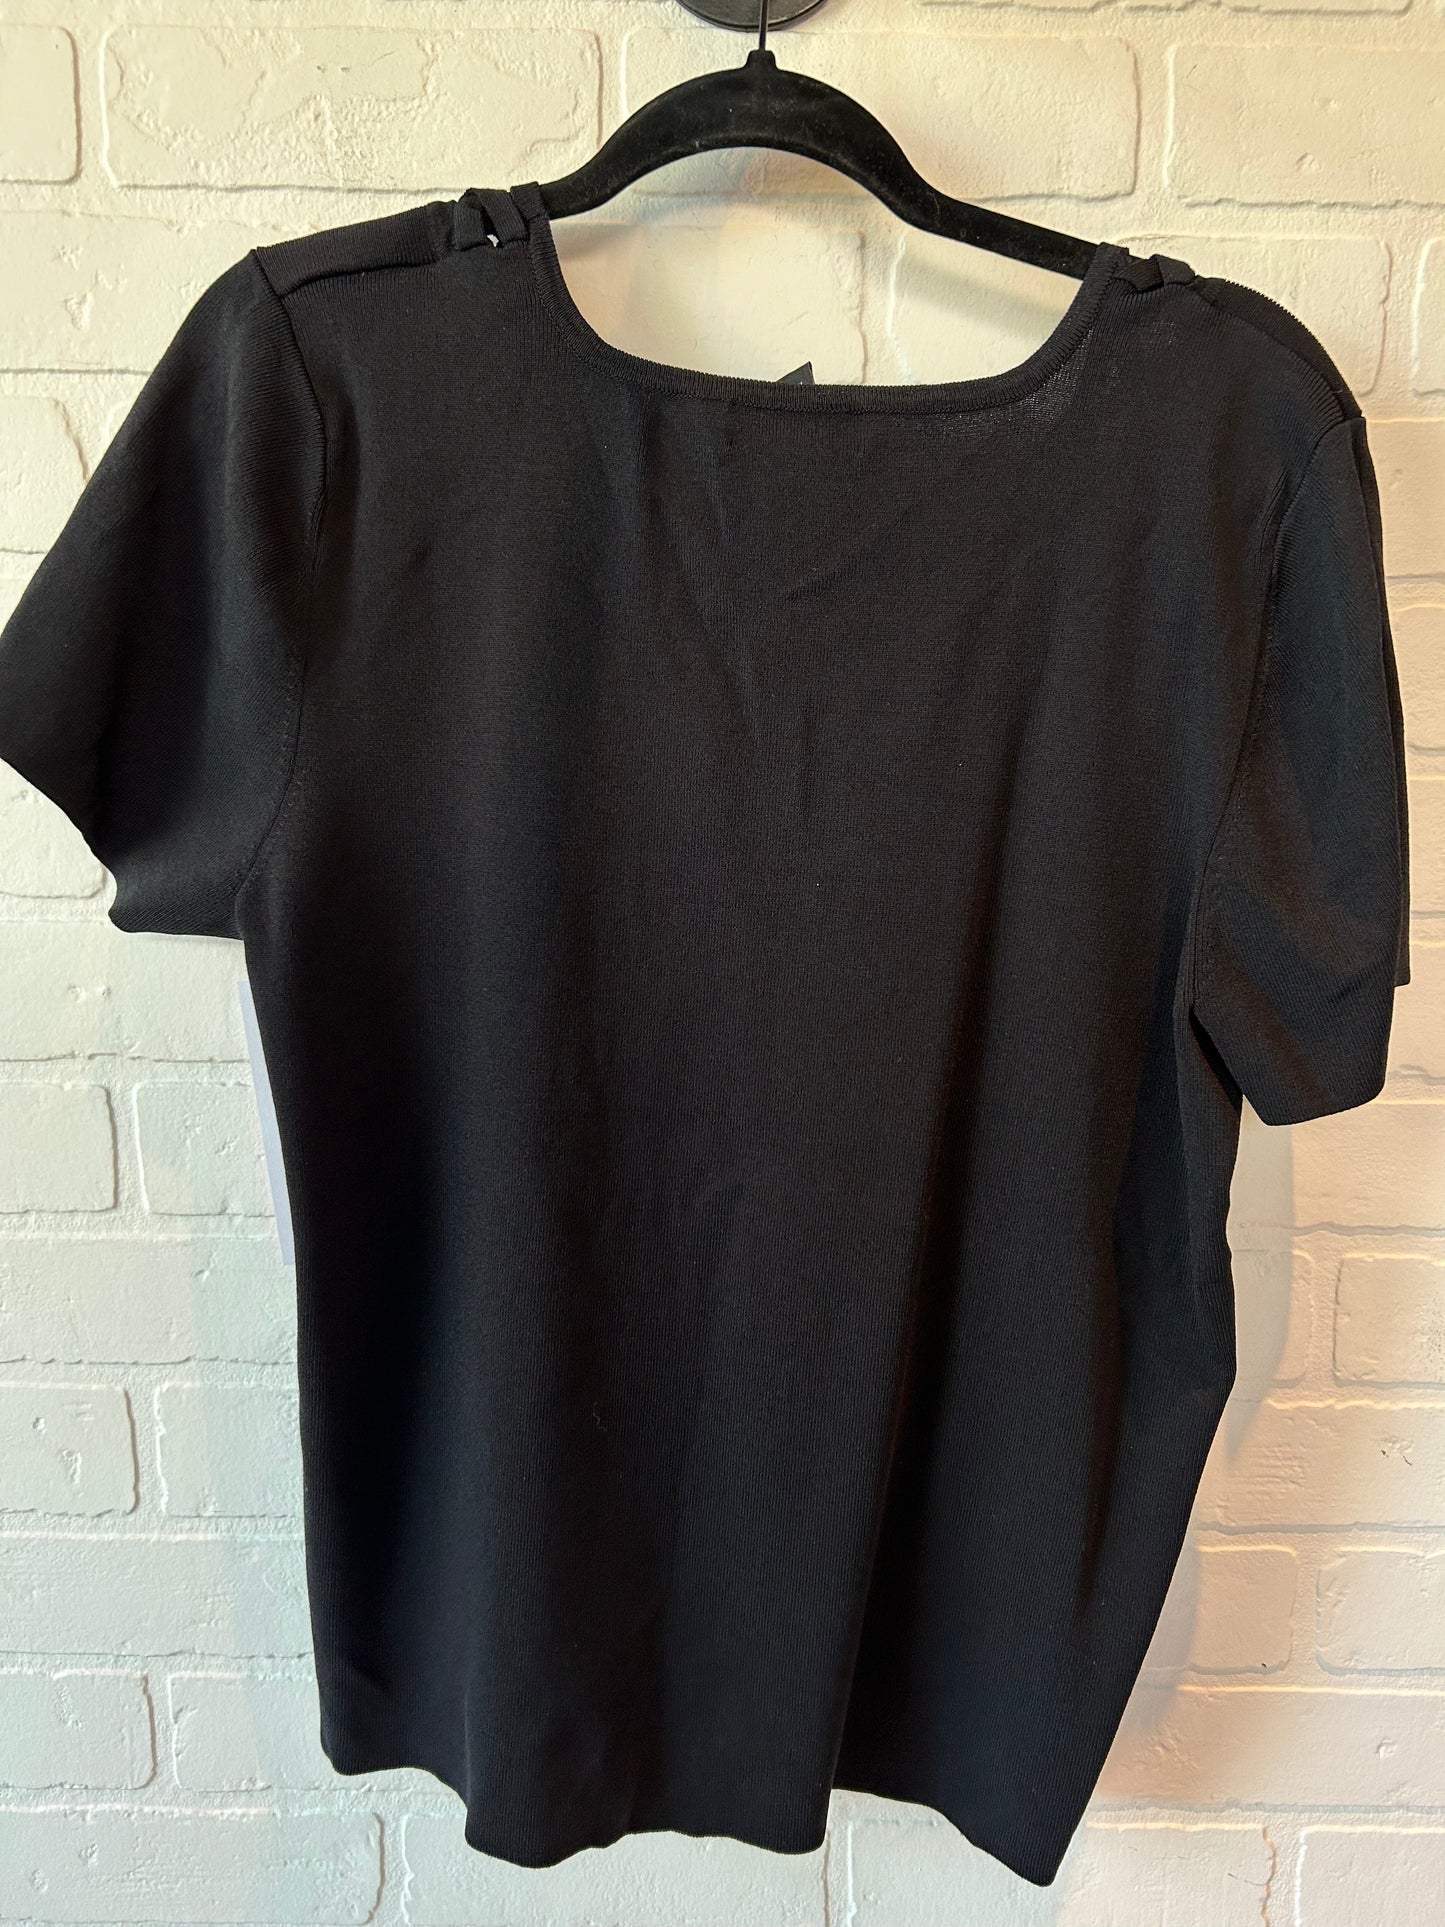 Black Top Short Sleeve Cable And Gauge, Size 1x